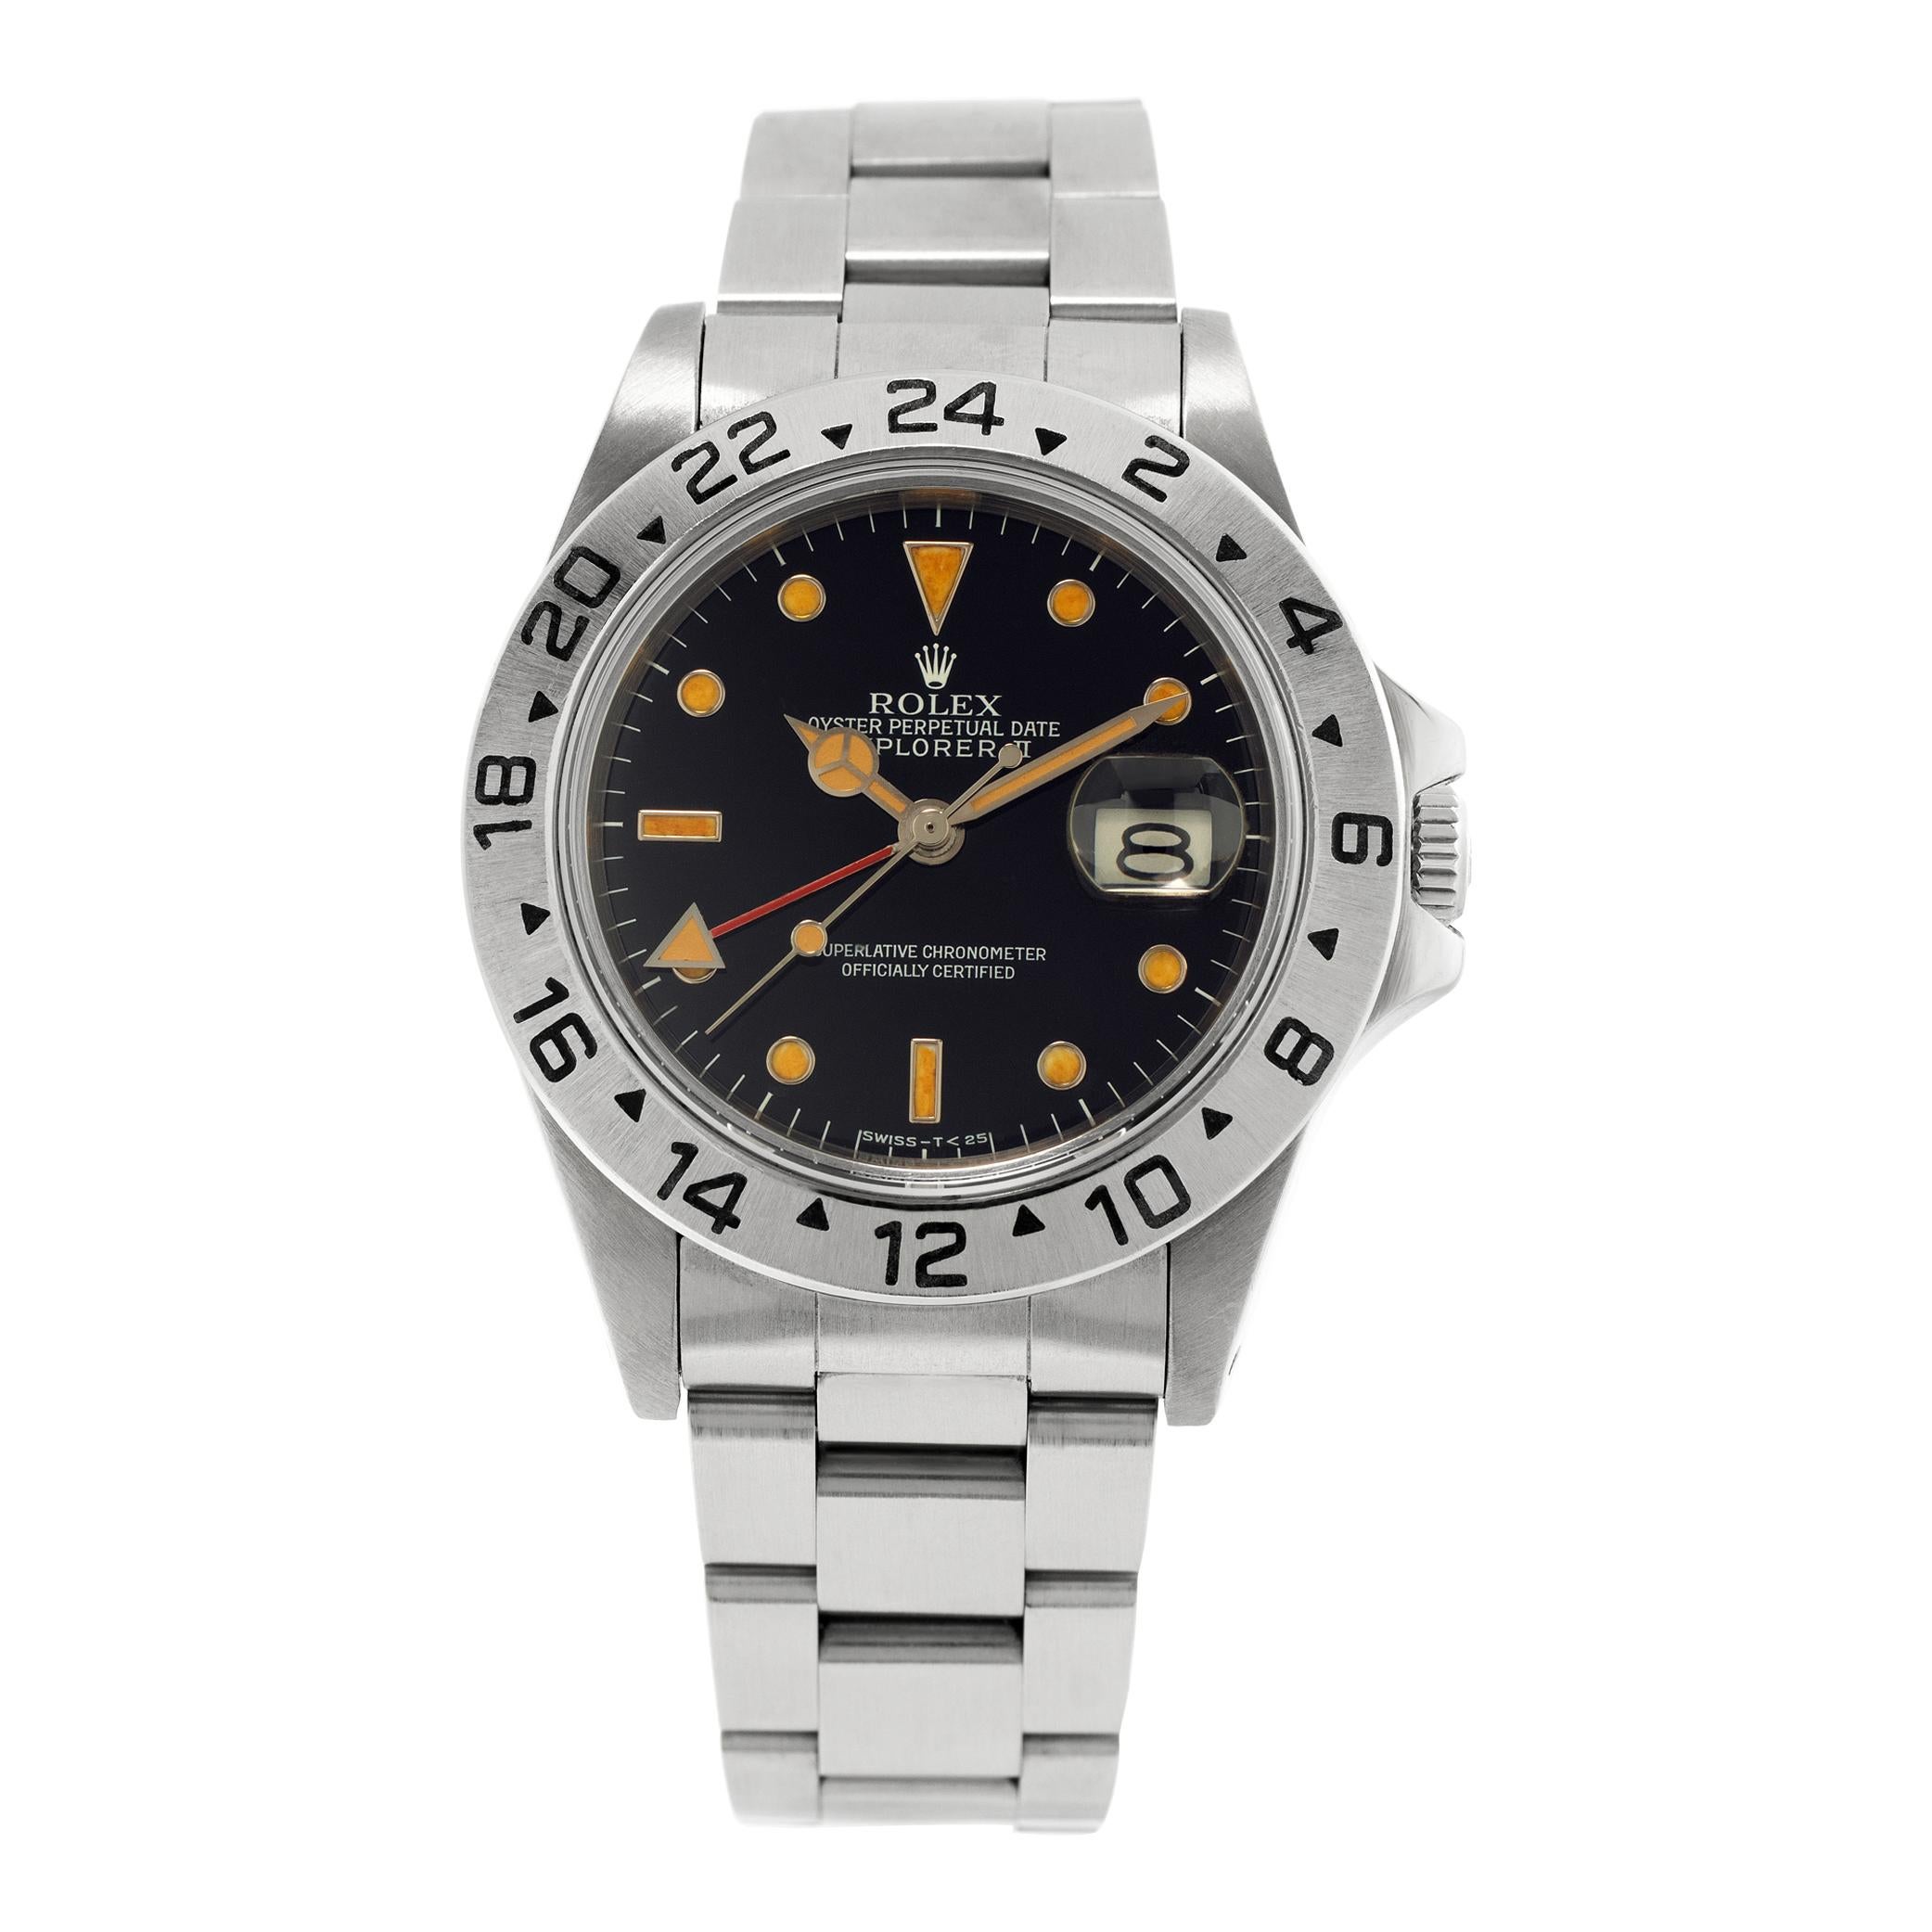 Rolex Explorer II stainless steel Automatic Wristwatch Ref 16550 For Sale